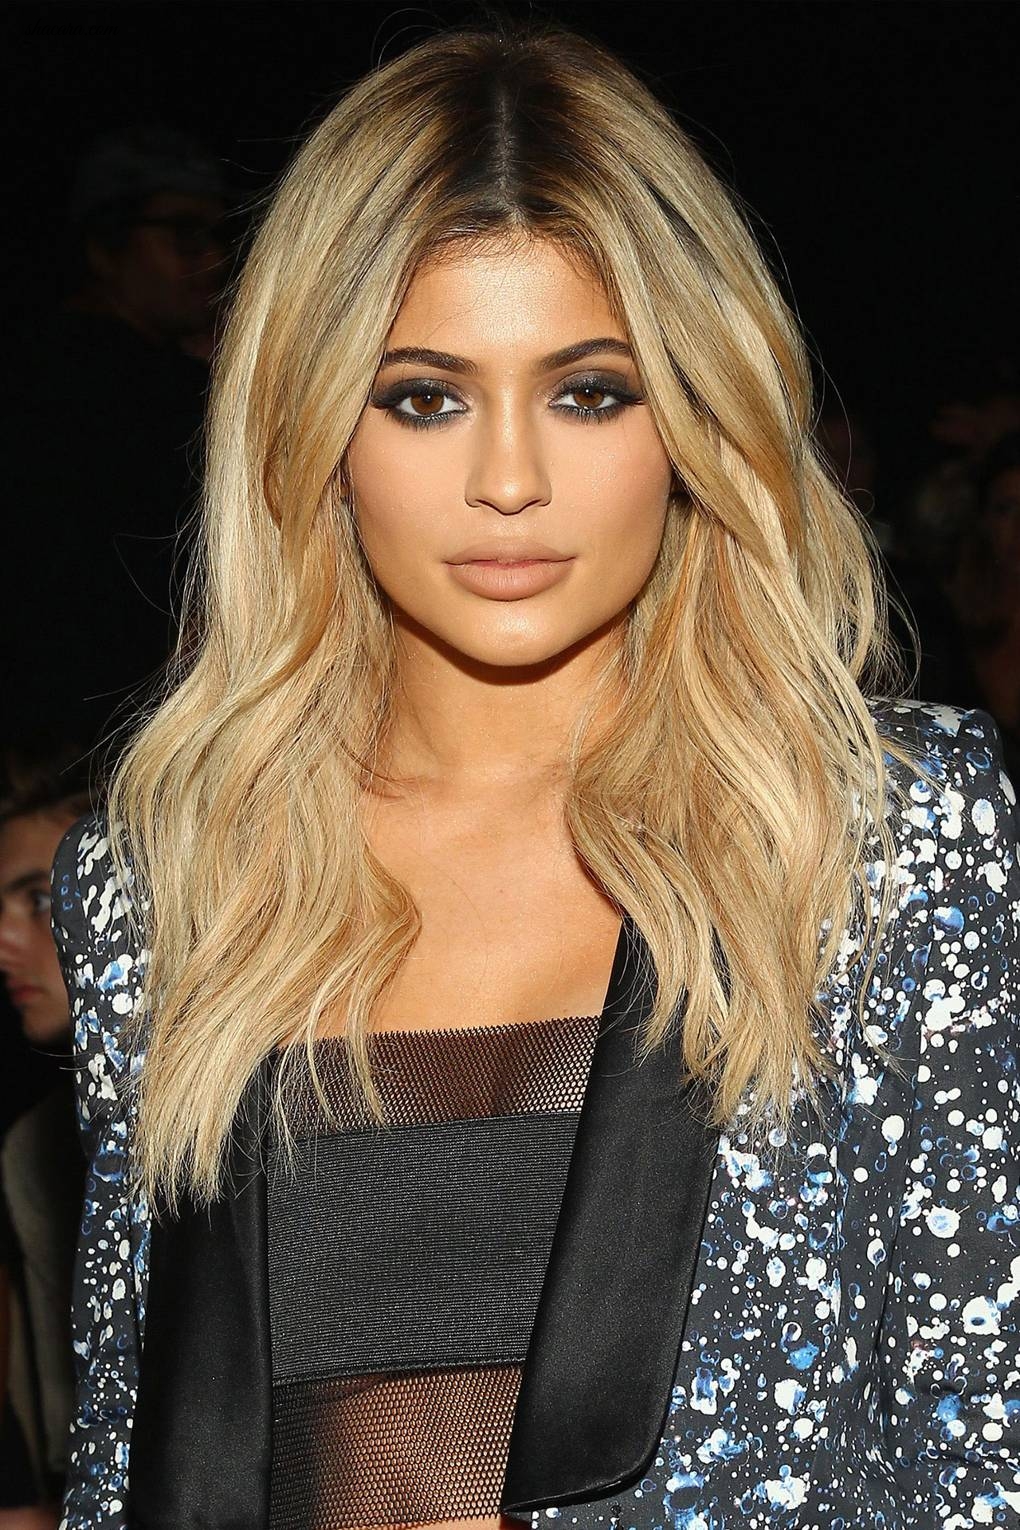 Kylie Jenner: Hair Style File